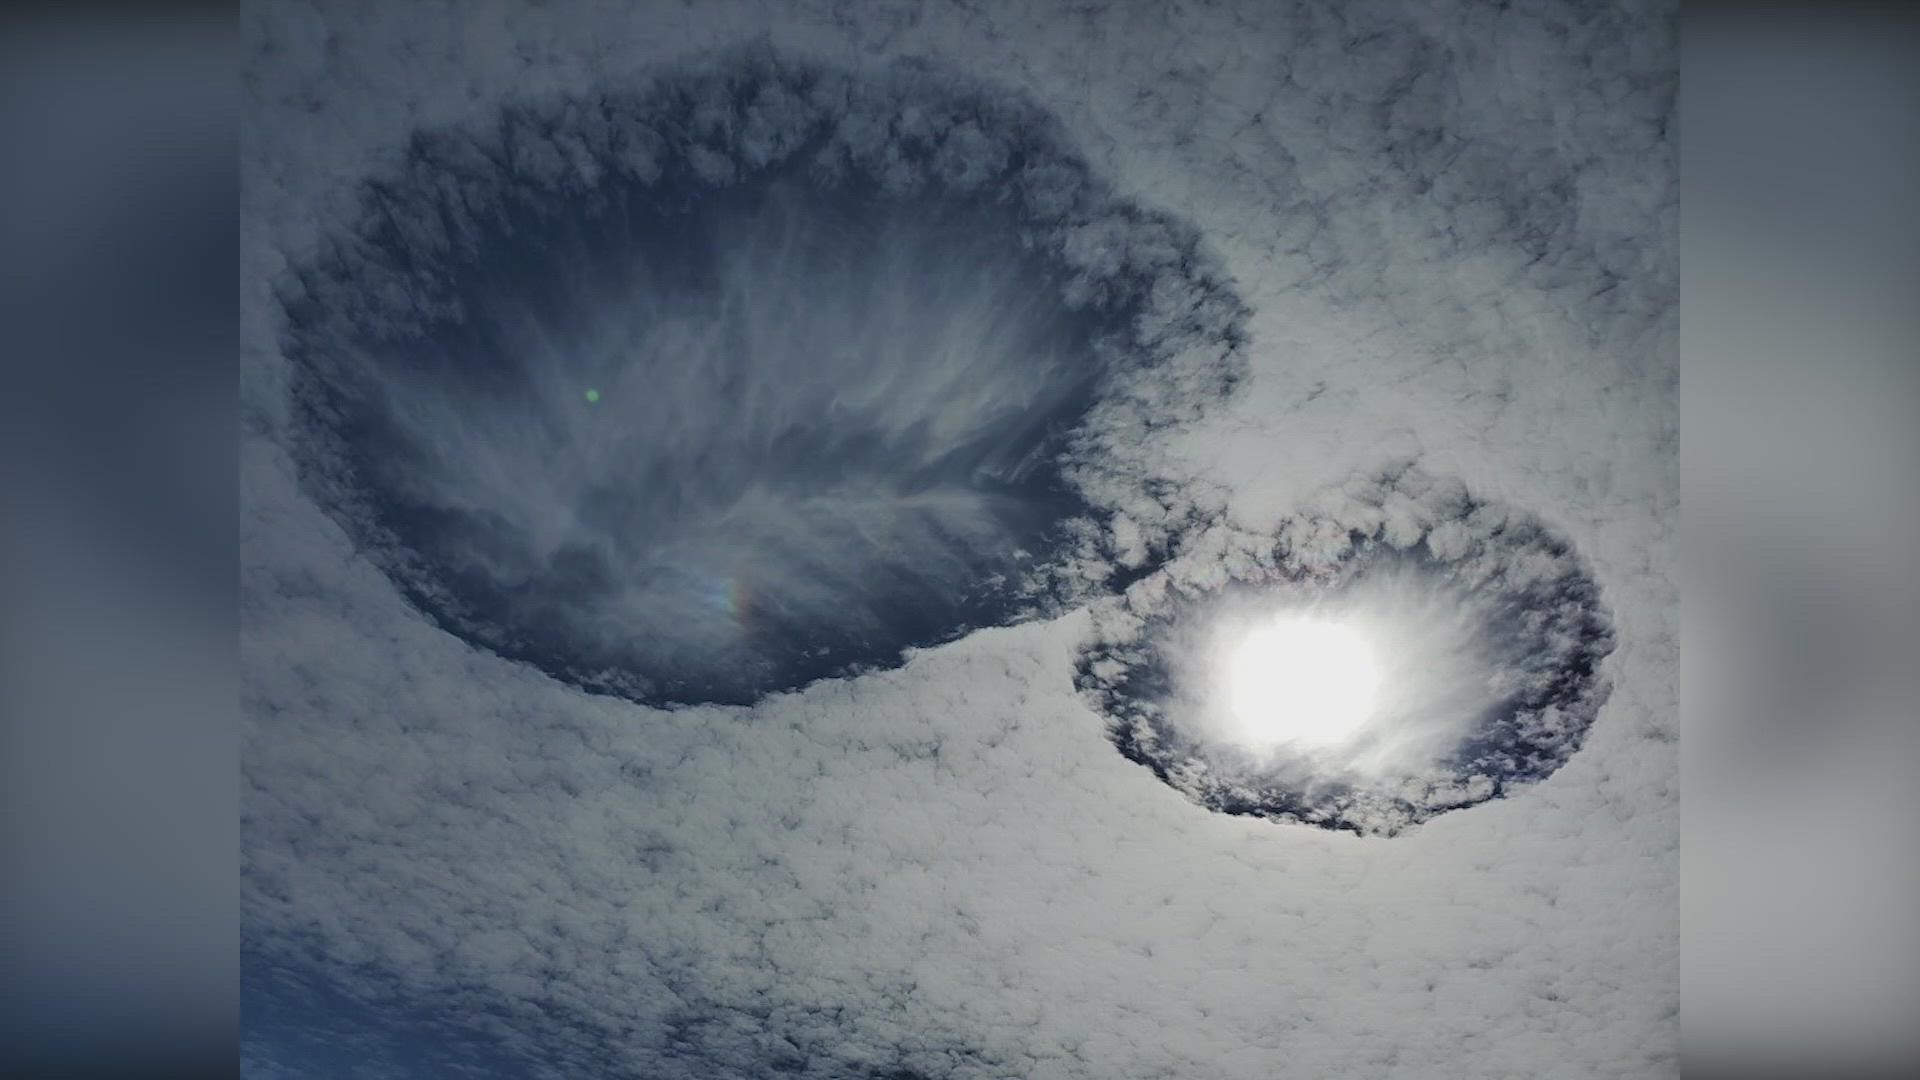 They are also known as fall streak hole clouds.